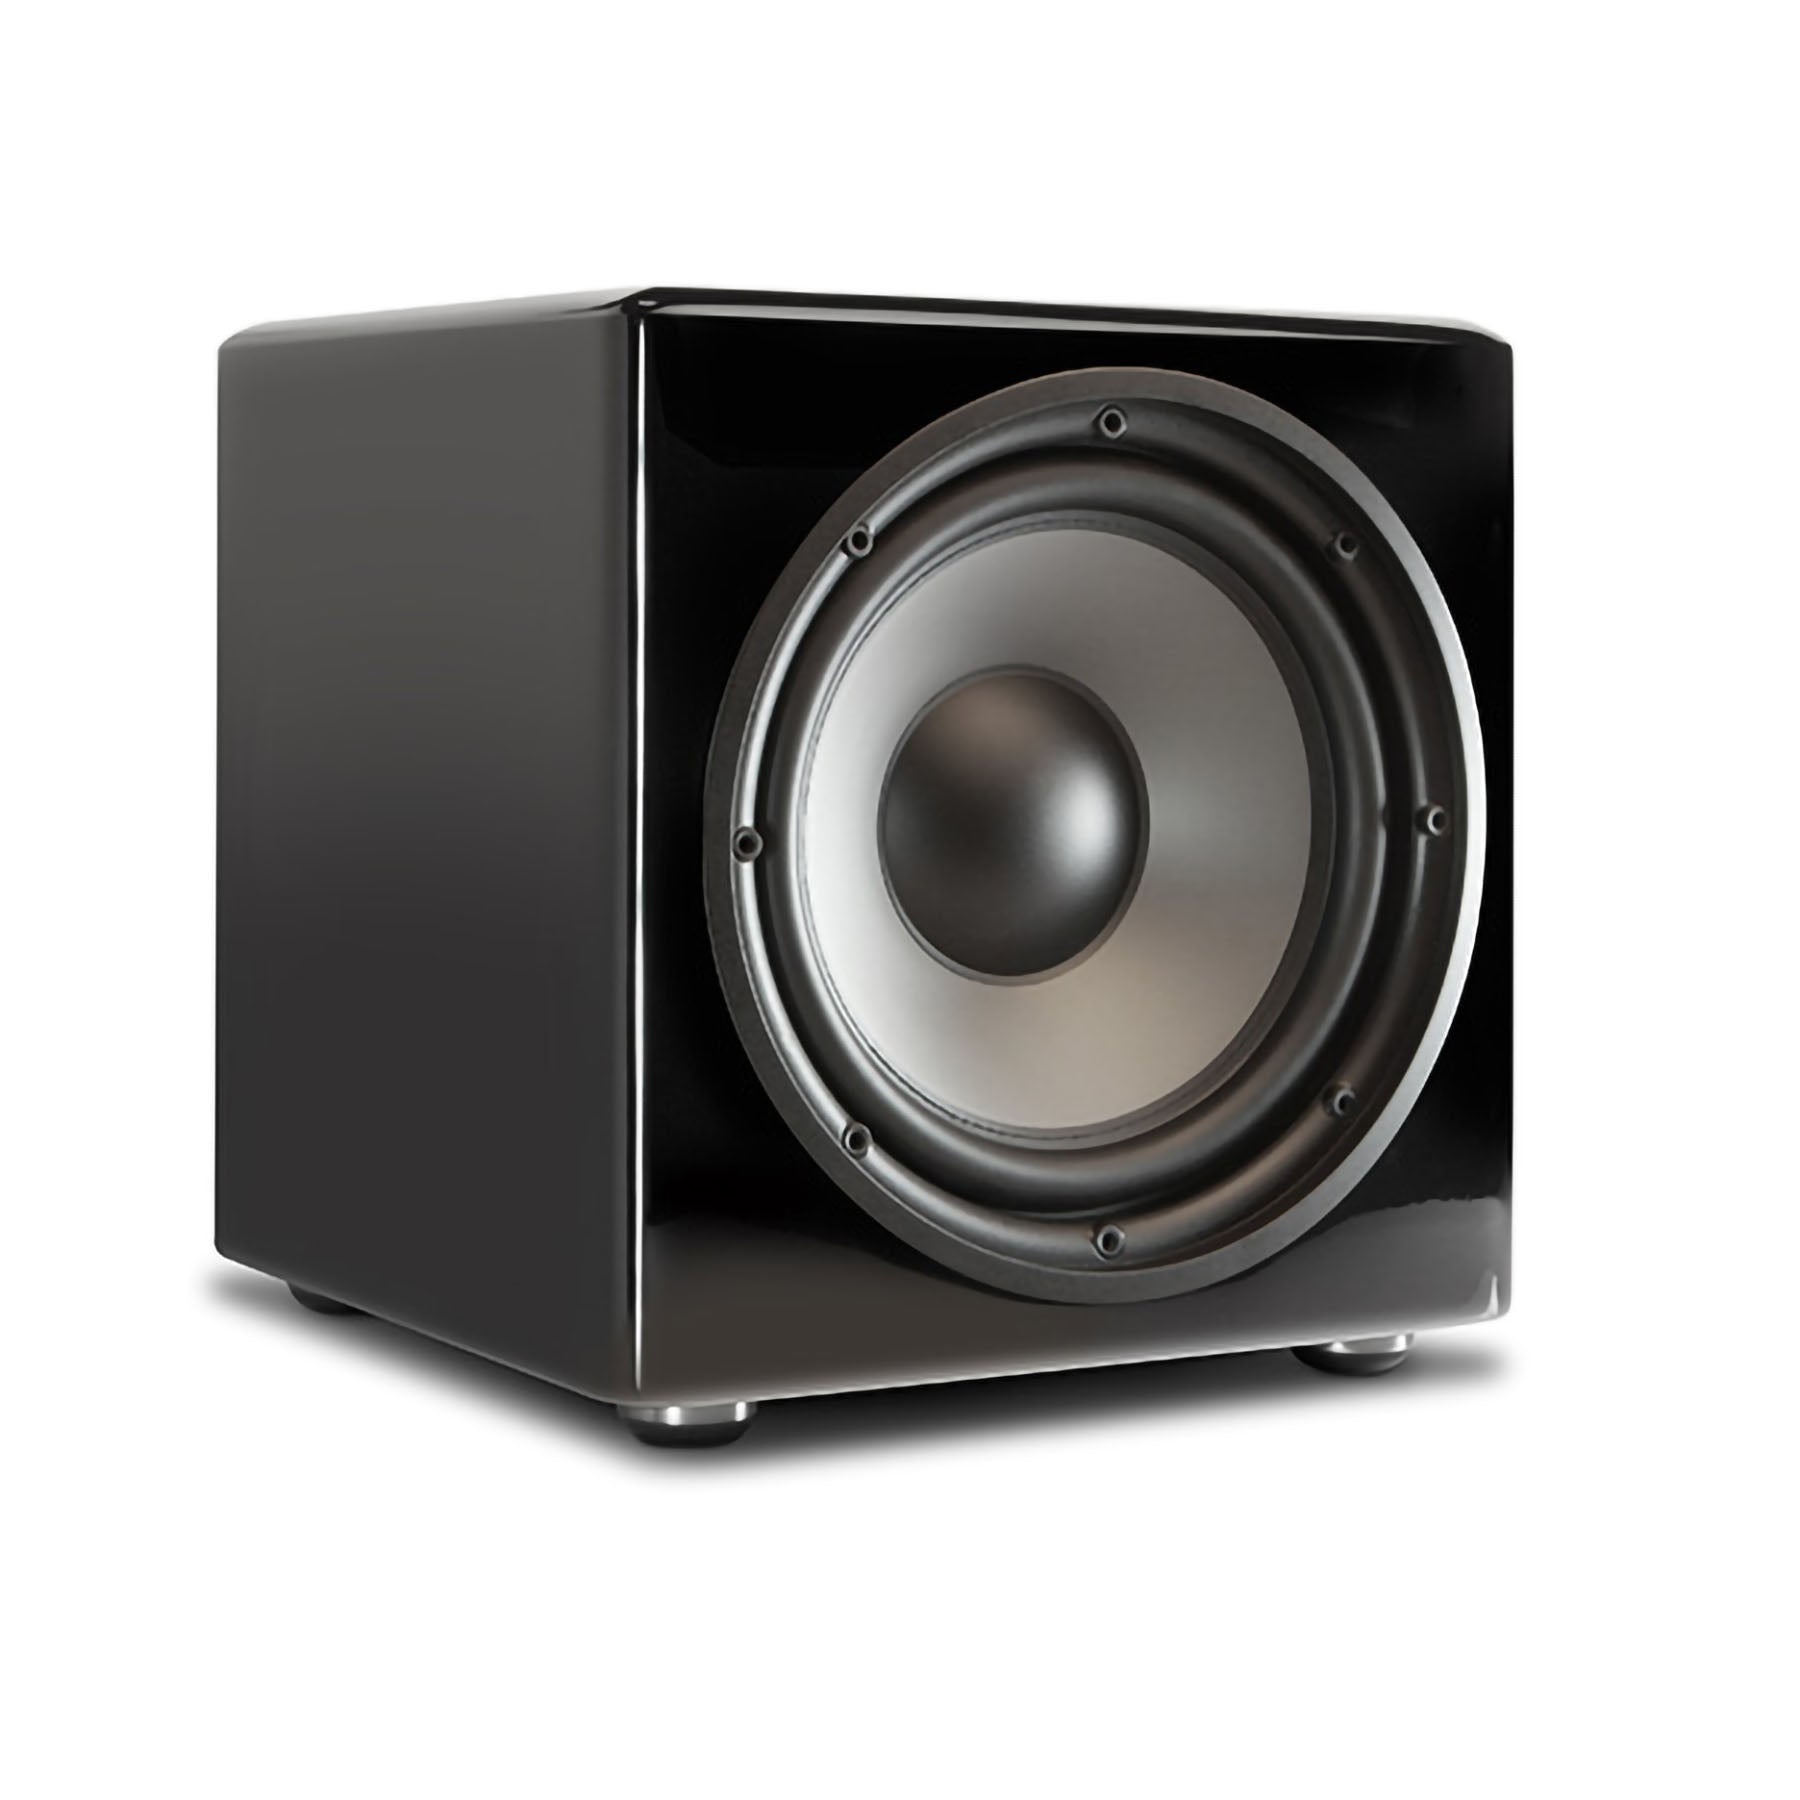 PSB  SubSeries 250 – 10 Inch Subwoofer